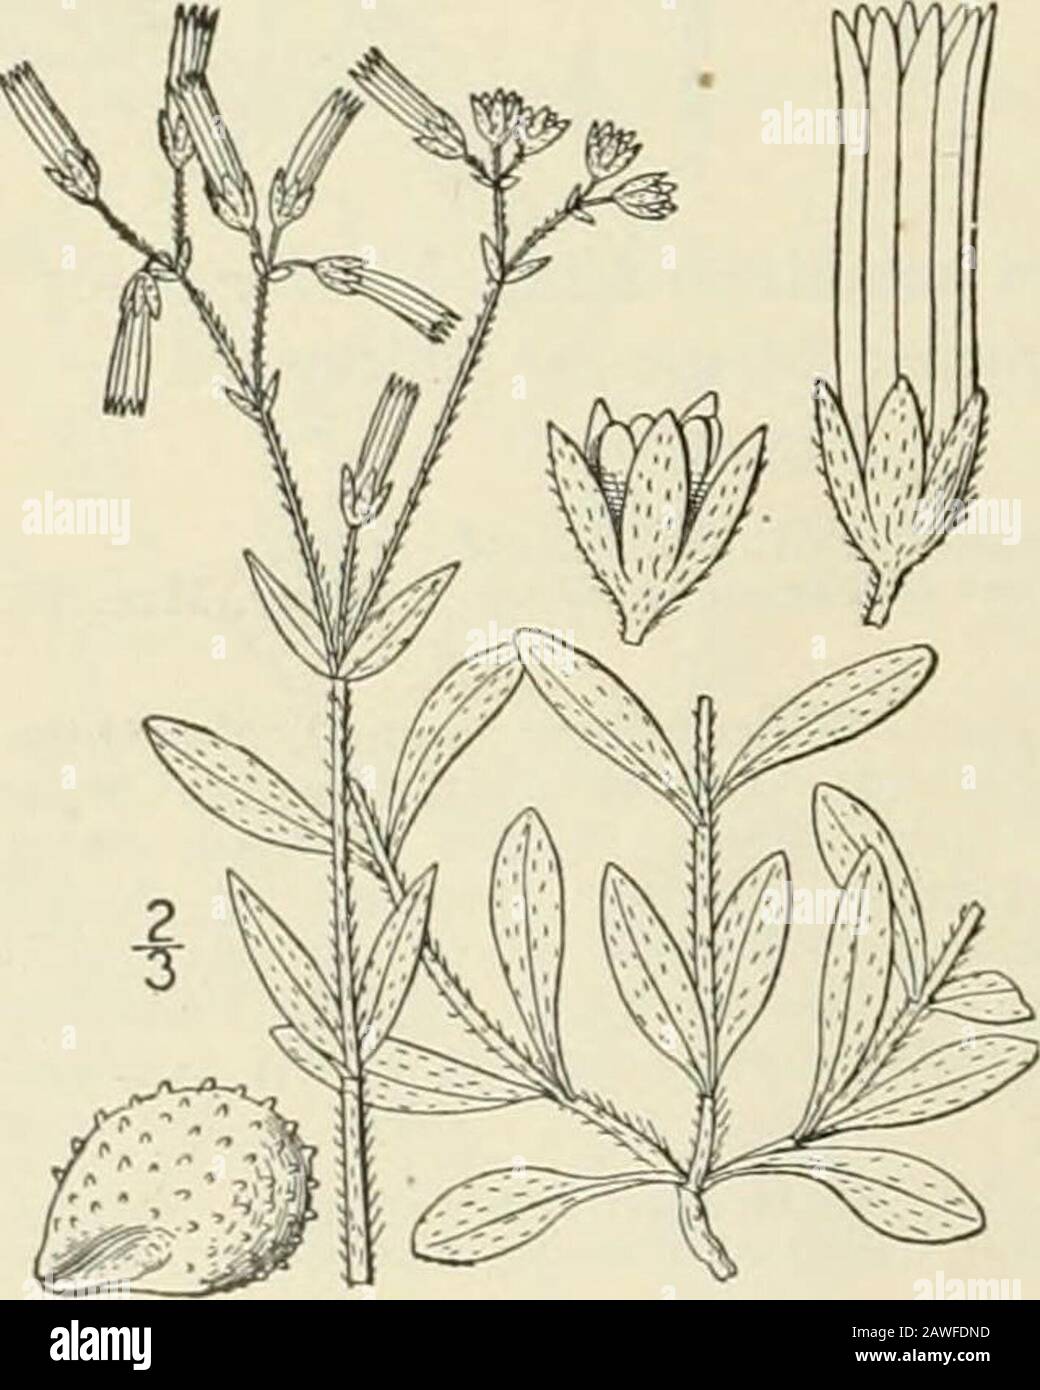 An illustrated flora of the northern United States, Canada and the British possessions : from Newfoundland to the parallel of the southern boundary of Virginia and from the Atlantic Ocean westward to the 102nd meridian; 2nd ed. . 5. Cerastium brachypodum (Engchii.) Robinson. Short-stalked Chickweed. Fig. 1767. Cerastium nutans var. brachypodum Engelm. ; A. Gray, Man. Ed. 5, 94. 1867.Cerastium brachypodium Robinson; Britton, Mem. Torr. Club 5: 150. 1894.Cerastium brachypodium compactum Robinson, Proc. Am. Acad. 29: 278. 1894. Annual, light green, viscid-pubescent or pu-bcrulent all over, stems Stock Photo